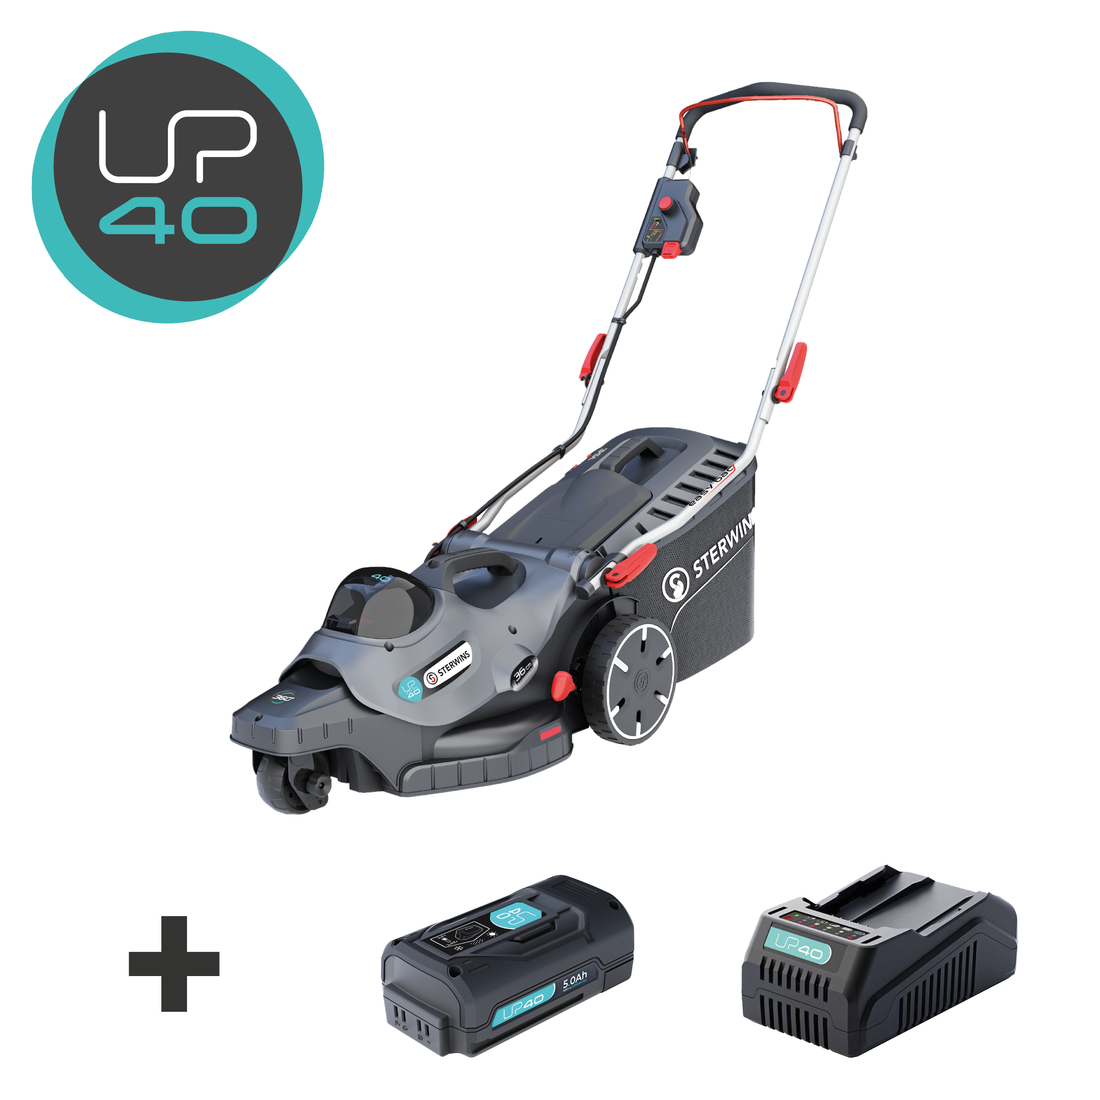 STERWINS 36CM CORDLESS LAWNMOWER WITH BATTERY AND CHARGER KIT UP40